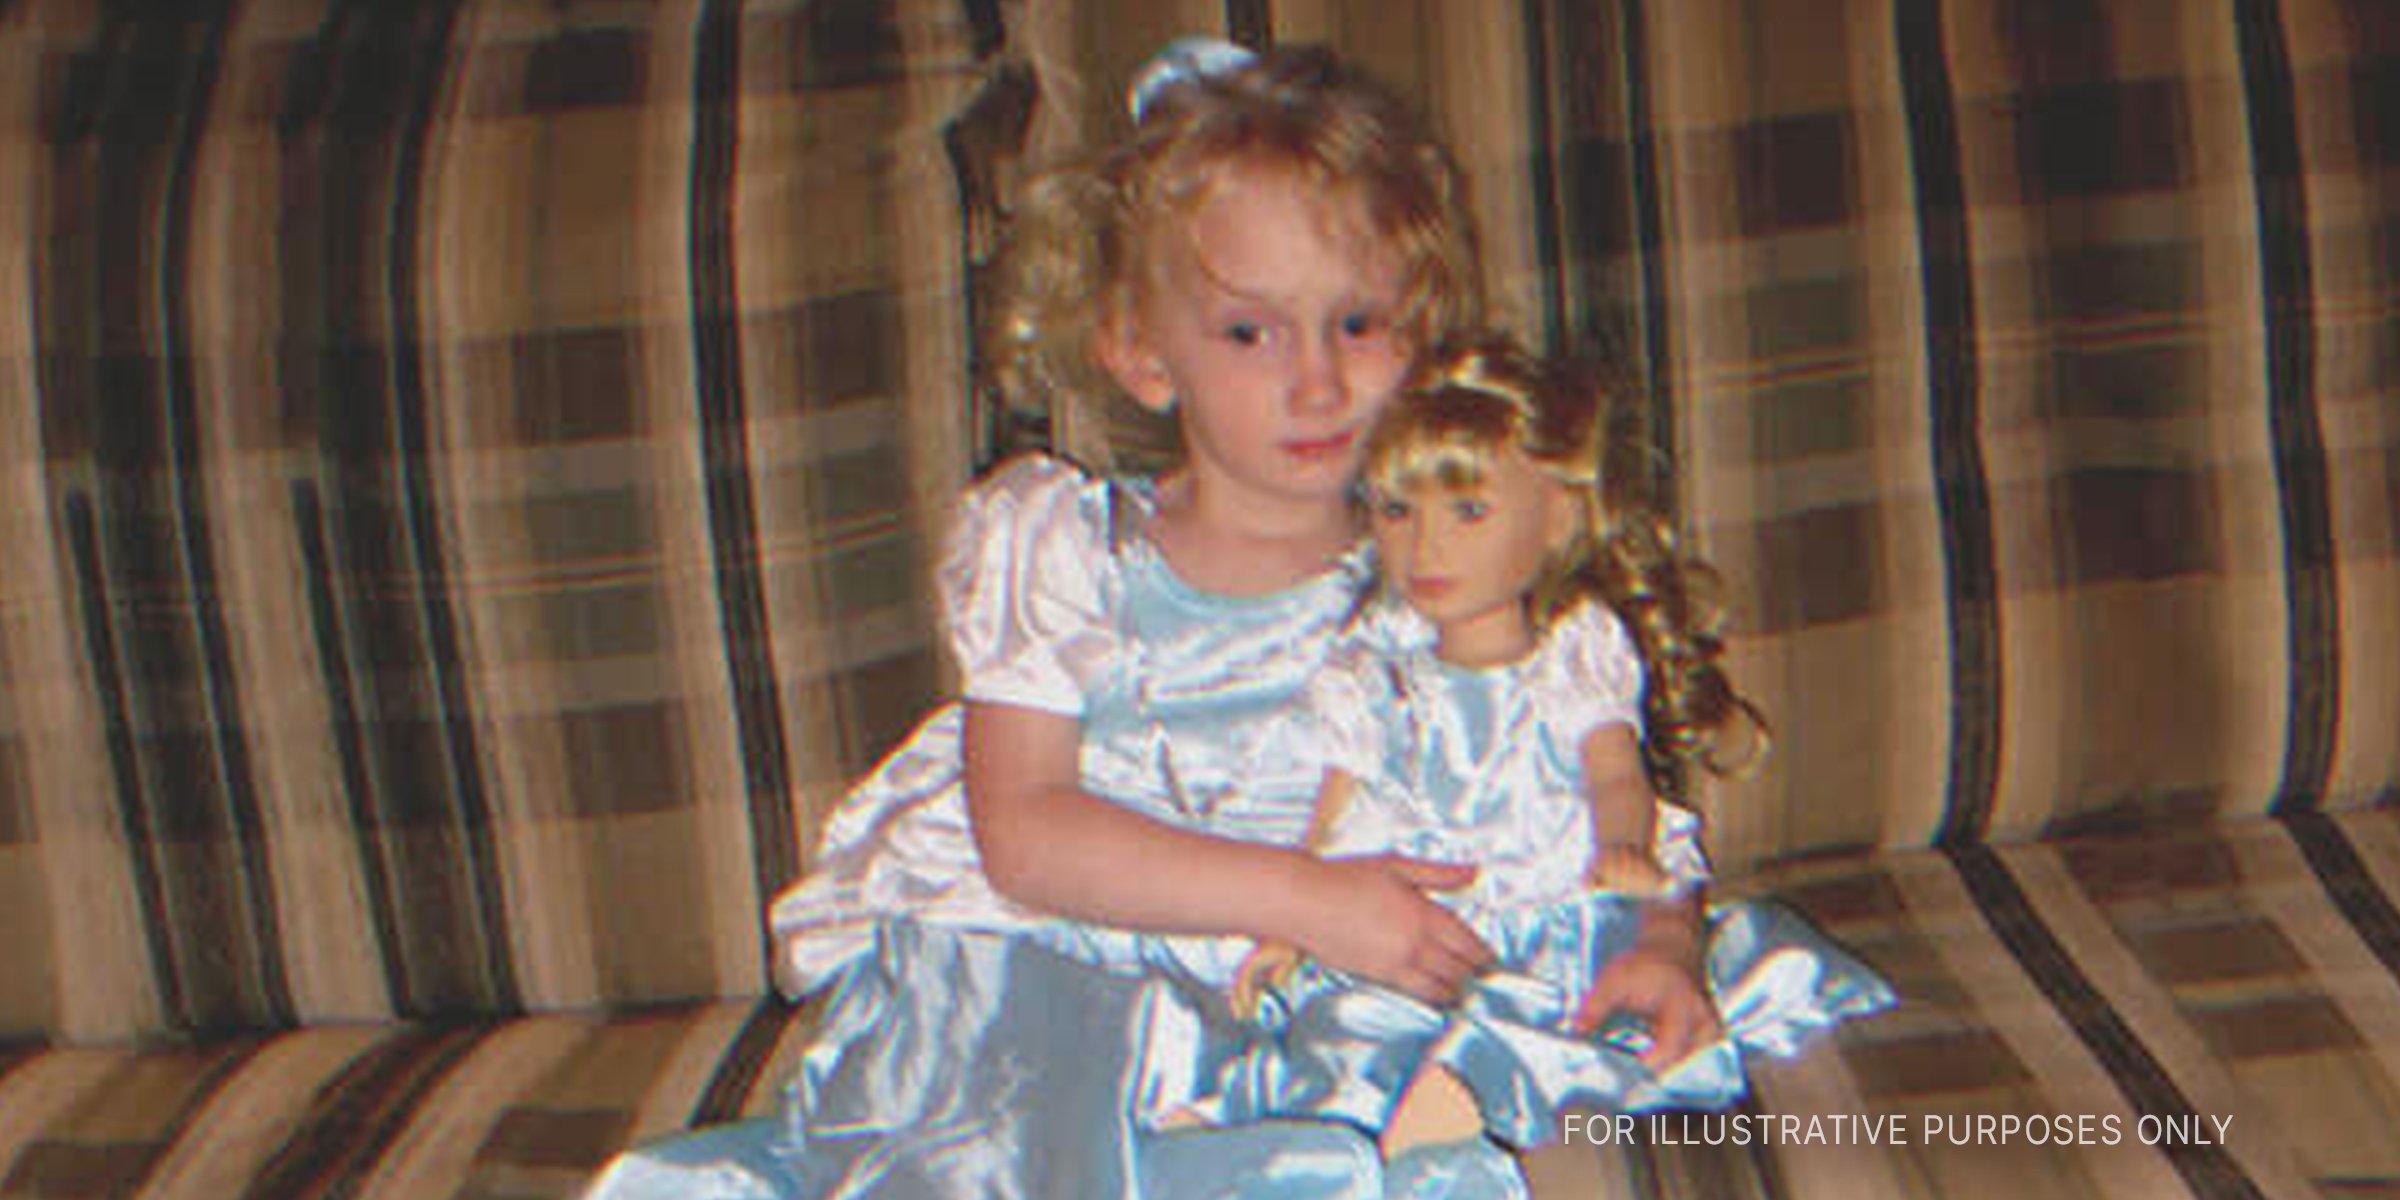 Little girl holding a doll on the couch. | Source: Flickr / Elizabeth/Table4Five (CC BY 2.0)